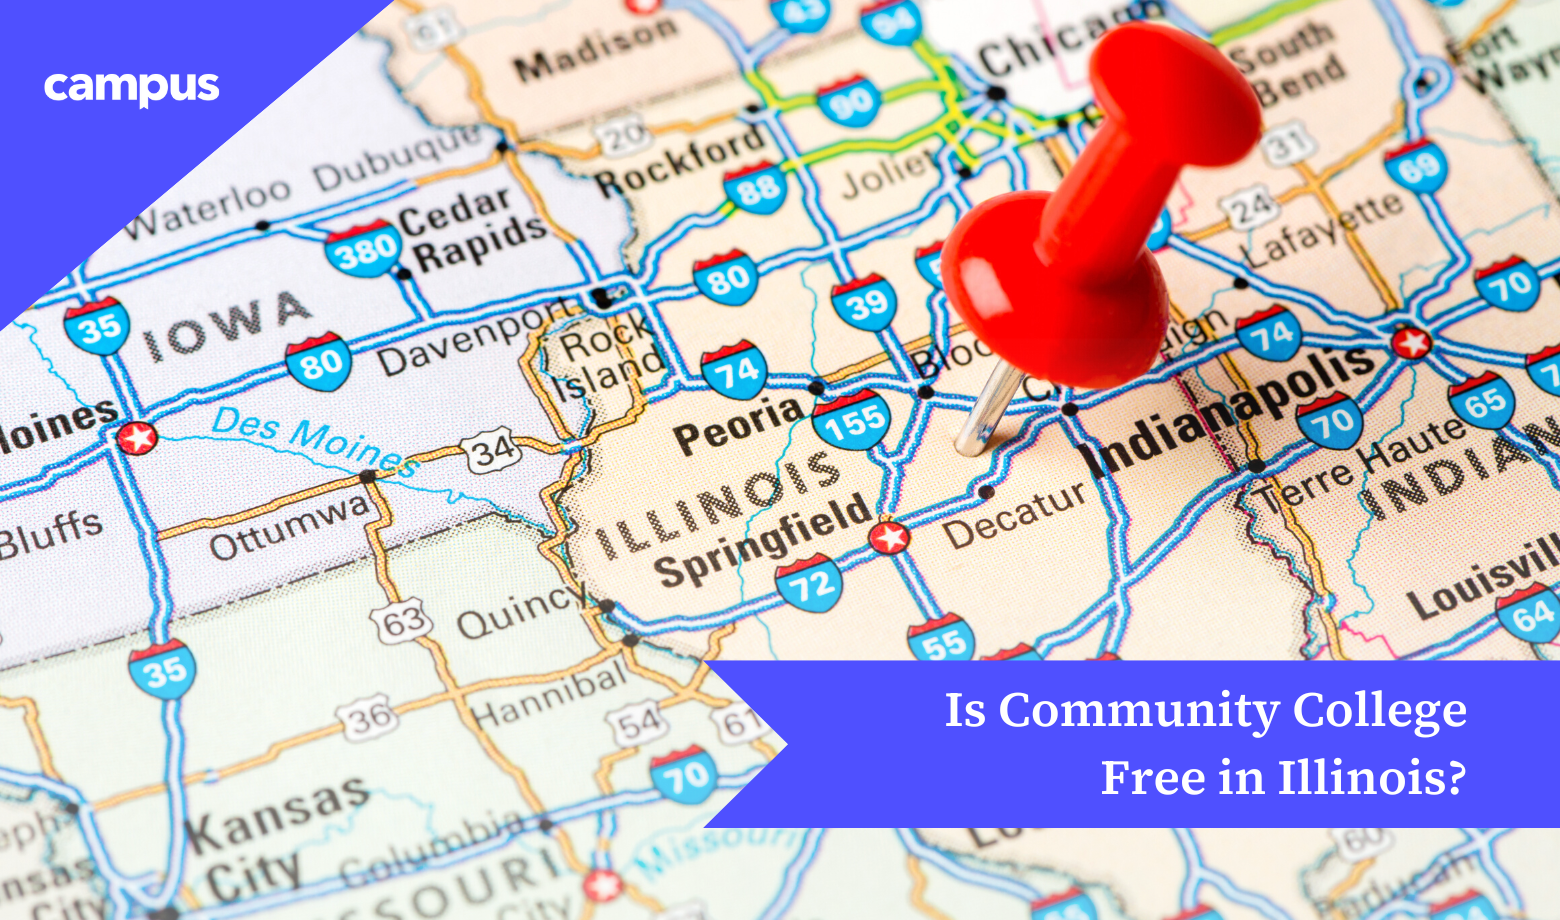 Is Community College Free in Illinois?